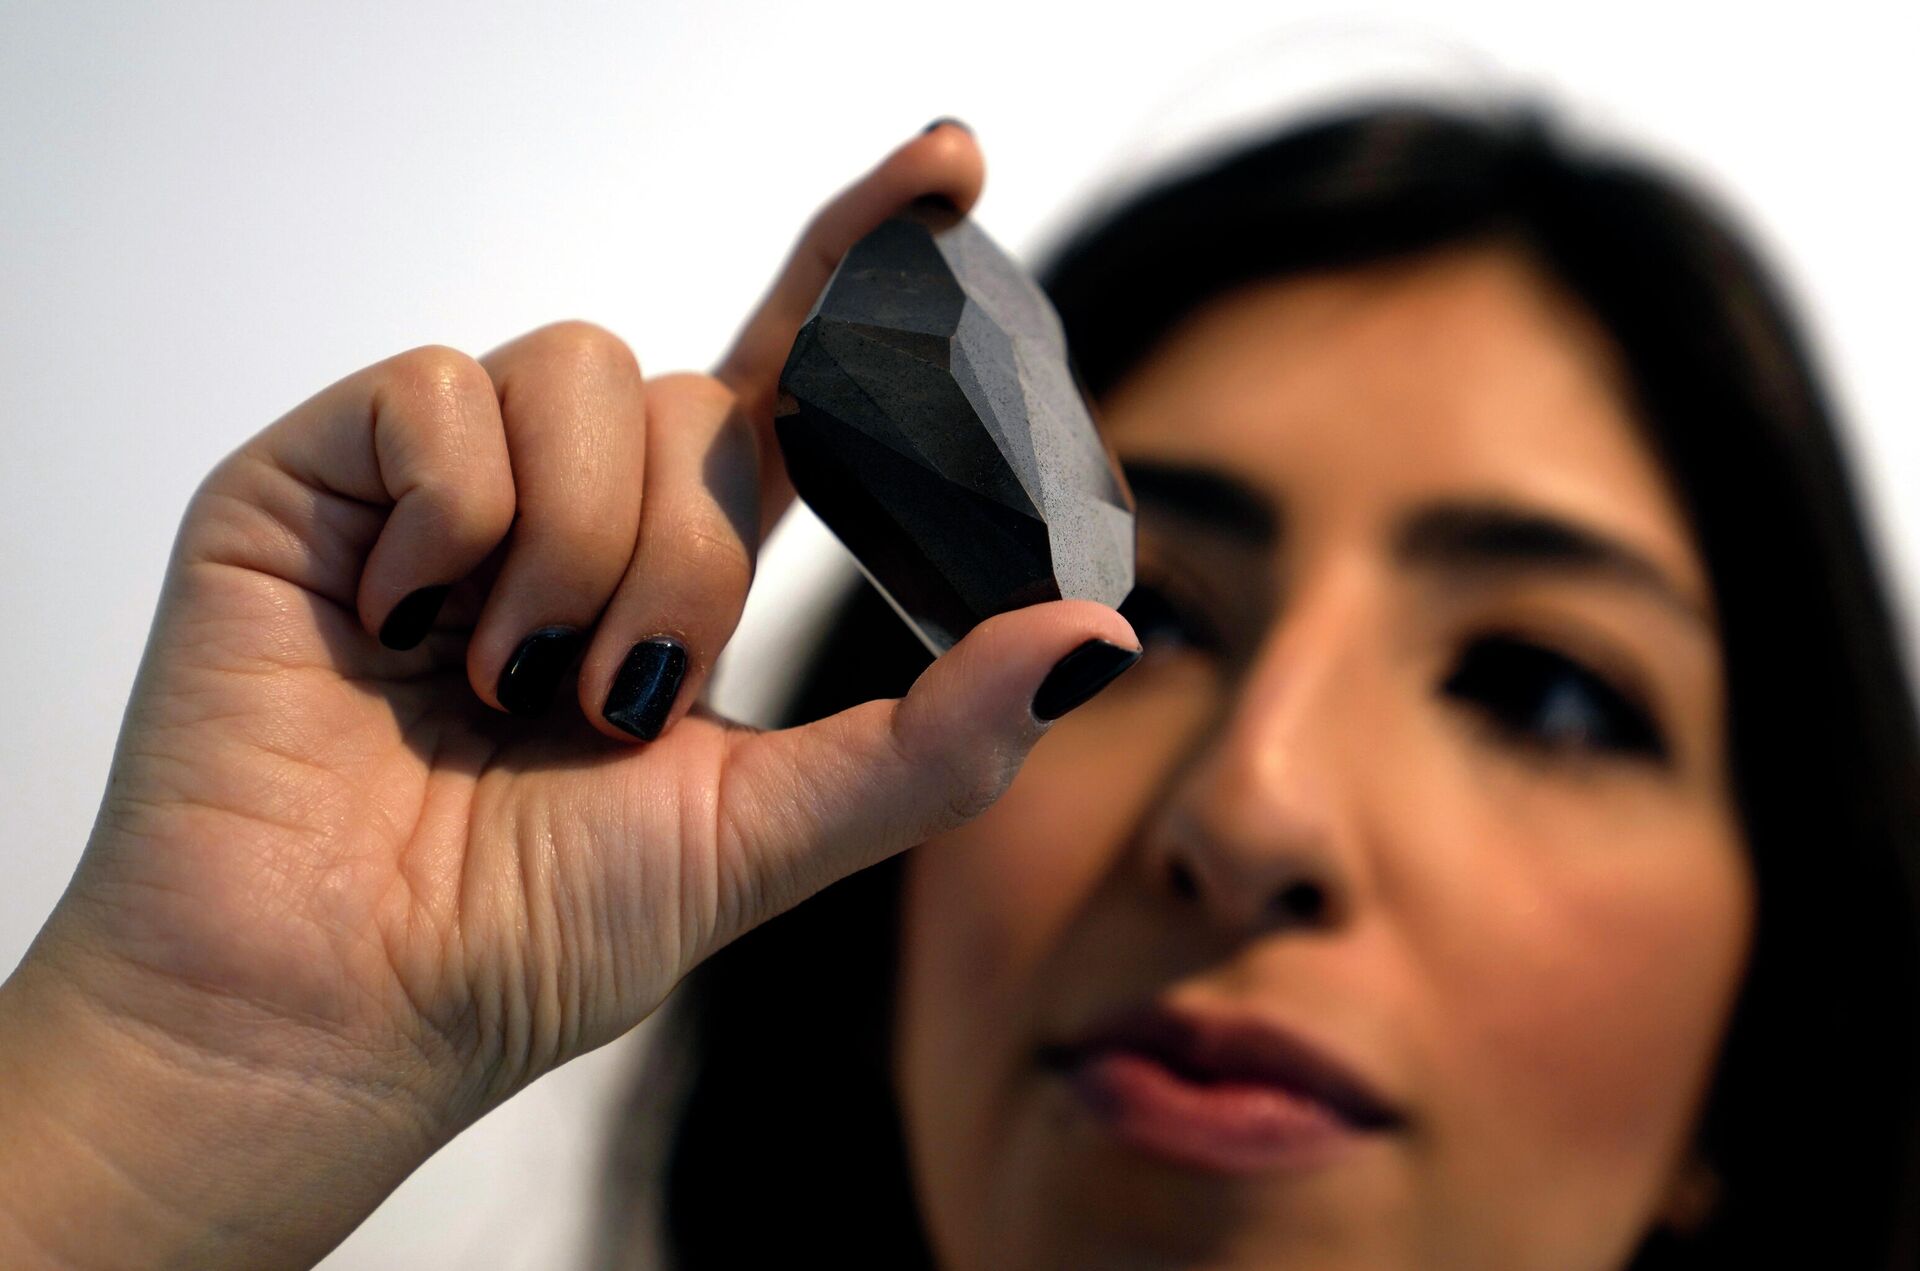 An employee of Sotheby's Dubai presents a 555.55 Carat Black Diamond The Enigma to be auctioned at Sotheby's Dubai gallery, in Dubai, United Arab Emirates, Monday, Jan. 17, 2022. - Sputnik International, 1920, 18.01.2022